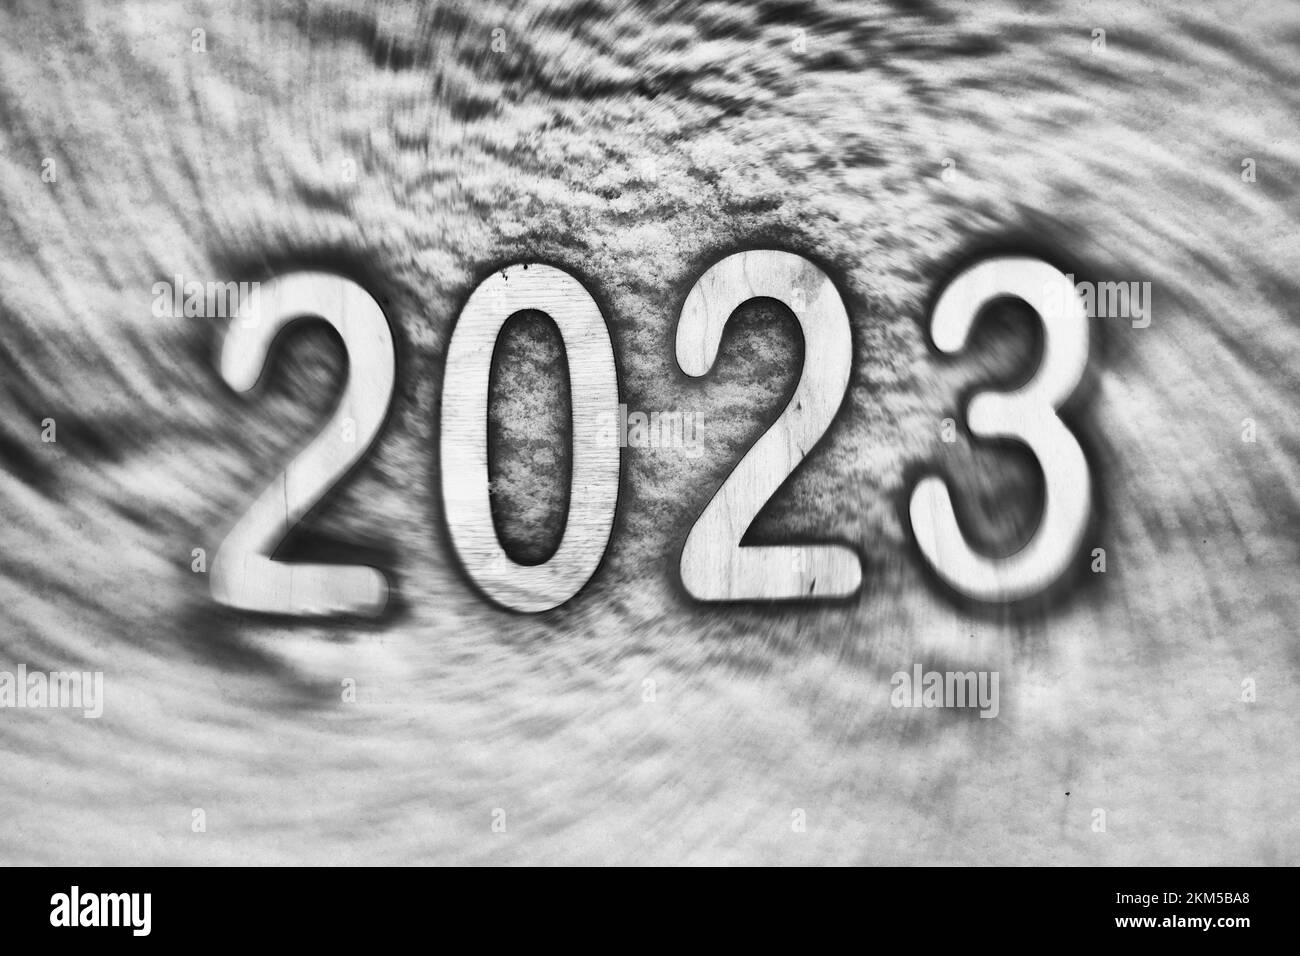 New year number 2023 on the snow in motion blur Stock Photo